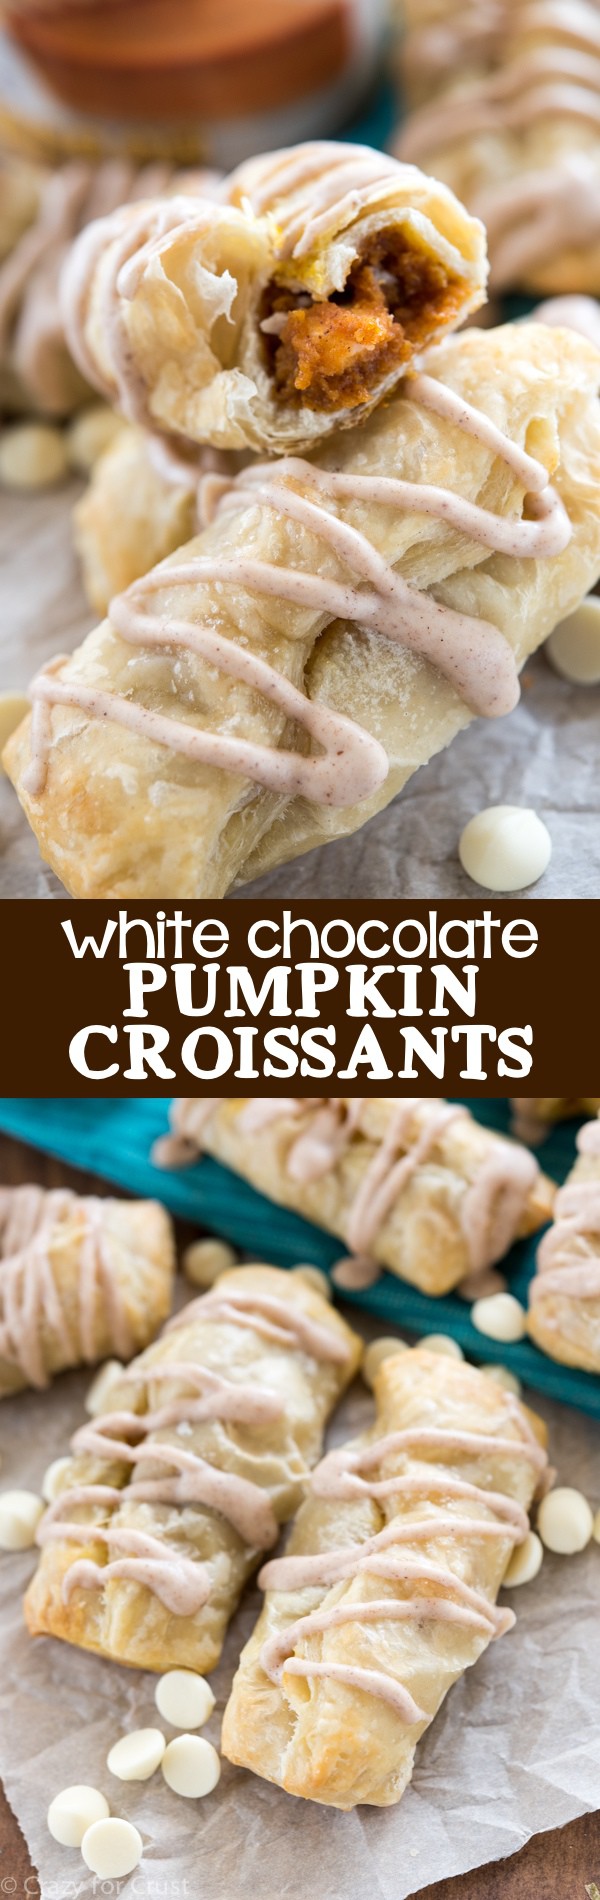 EASY White Chocolate Pumpkin Croissants - just a few ingredients to the perfect fall flavored croissant recipe!!